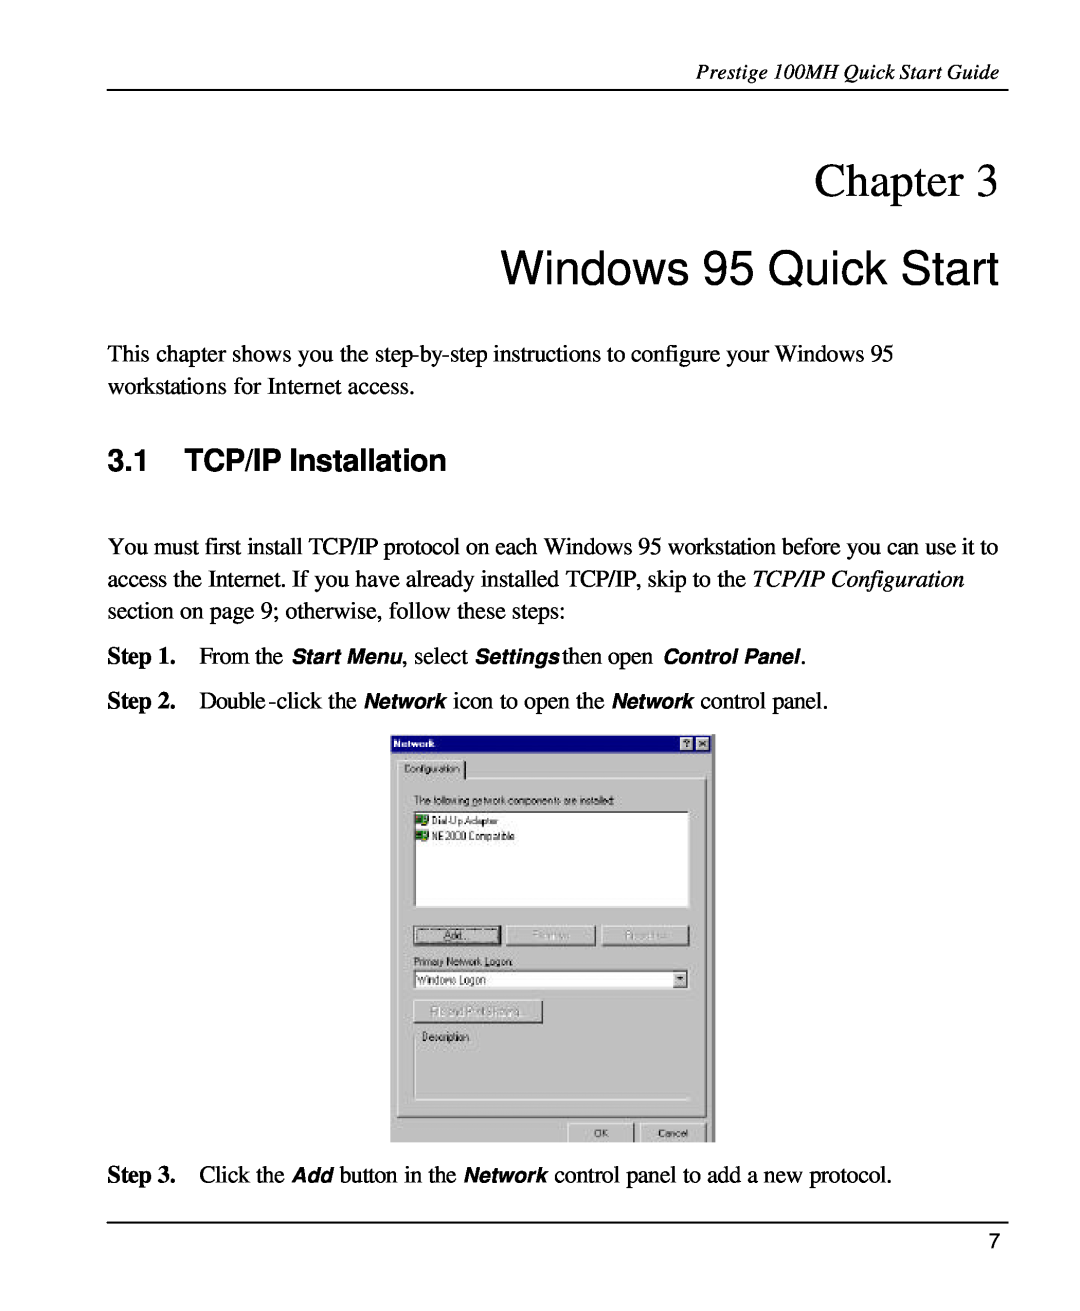 ZyXEL Communications 100MH quick start Windows 95 Quick Start, 3.1 TCP/IP Installation, Chapter 